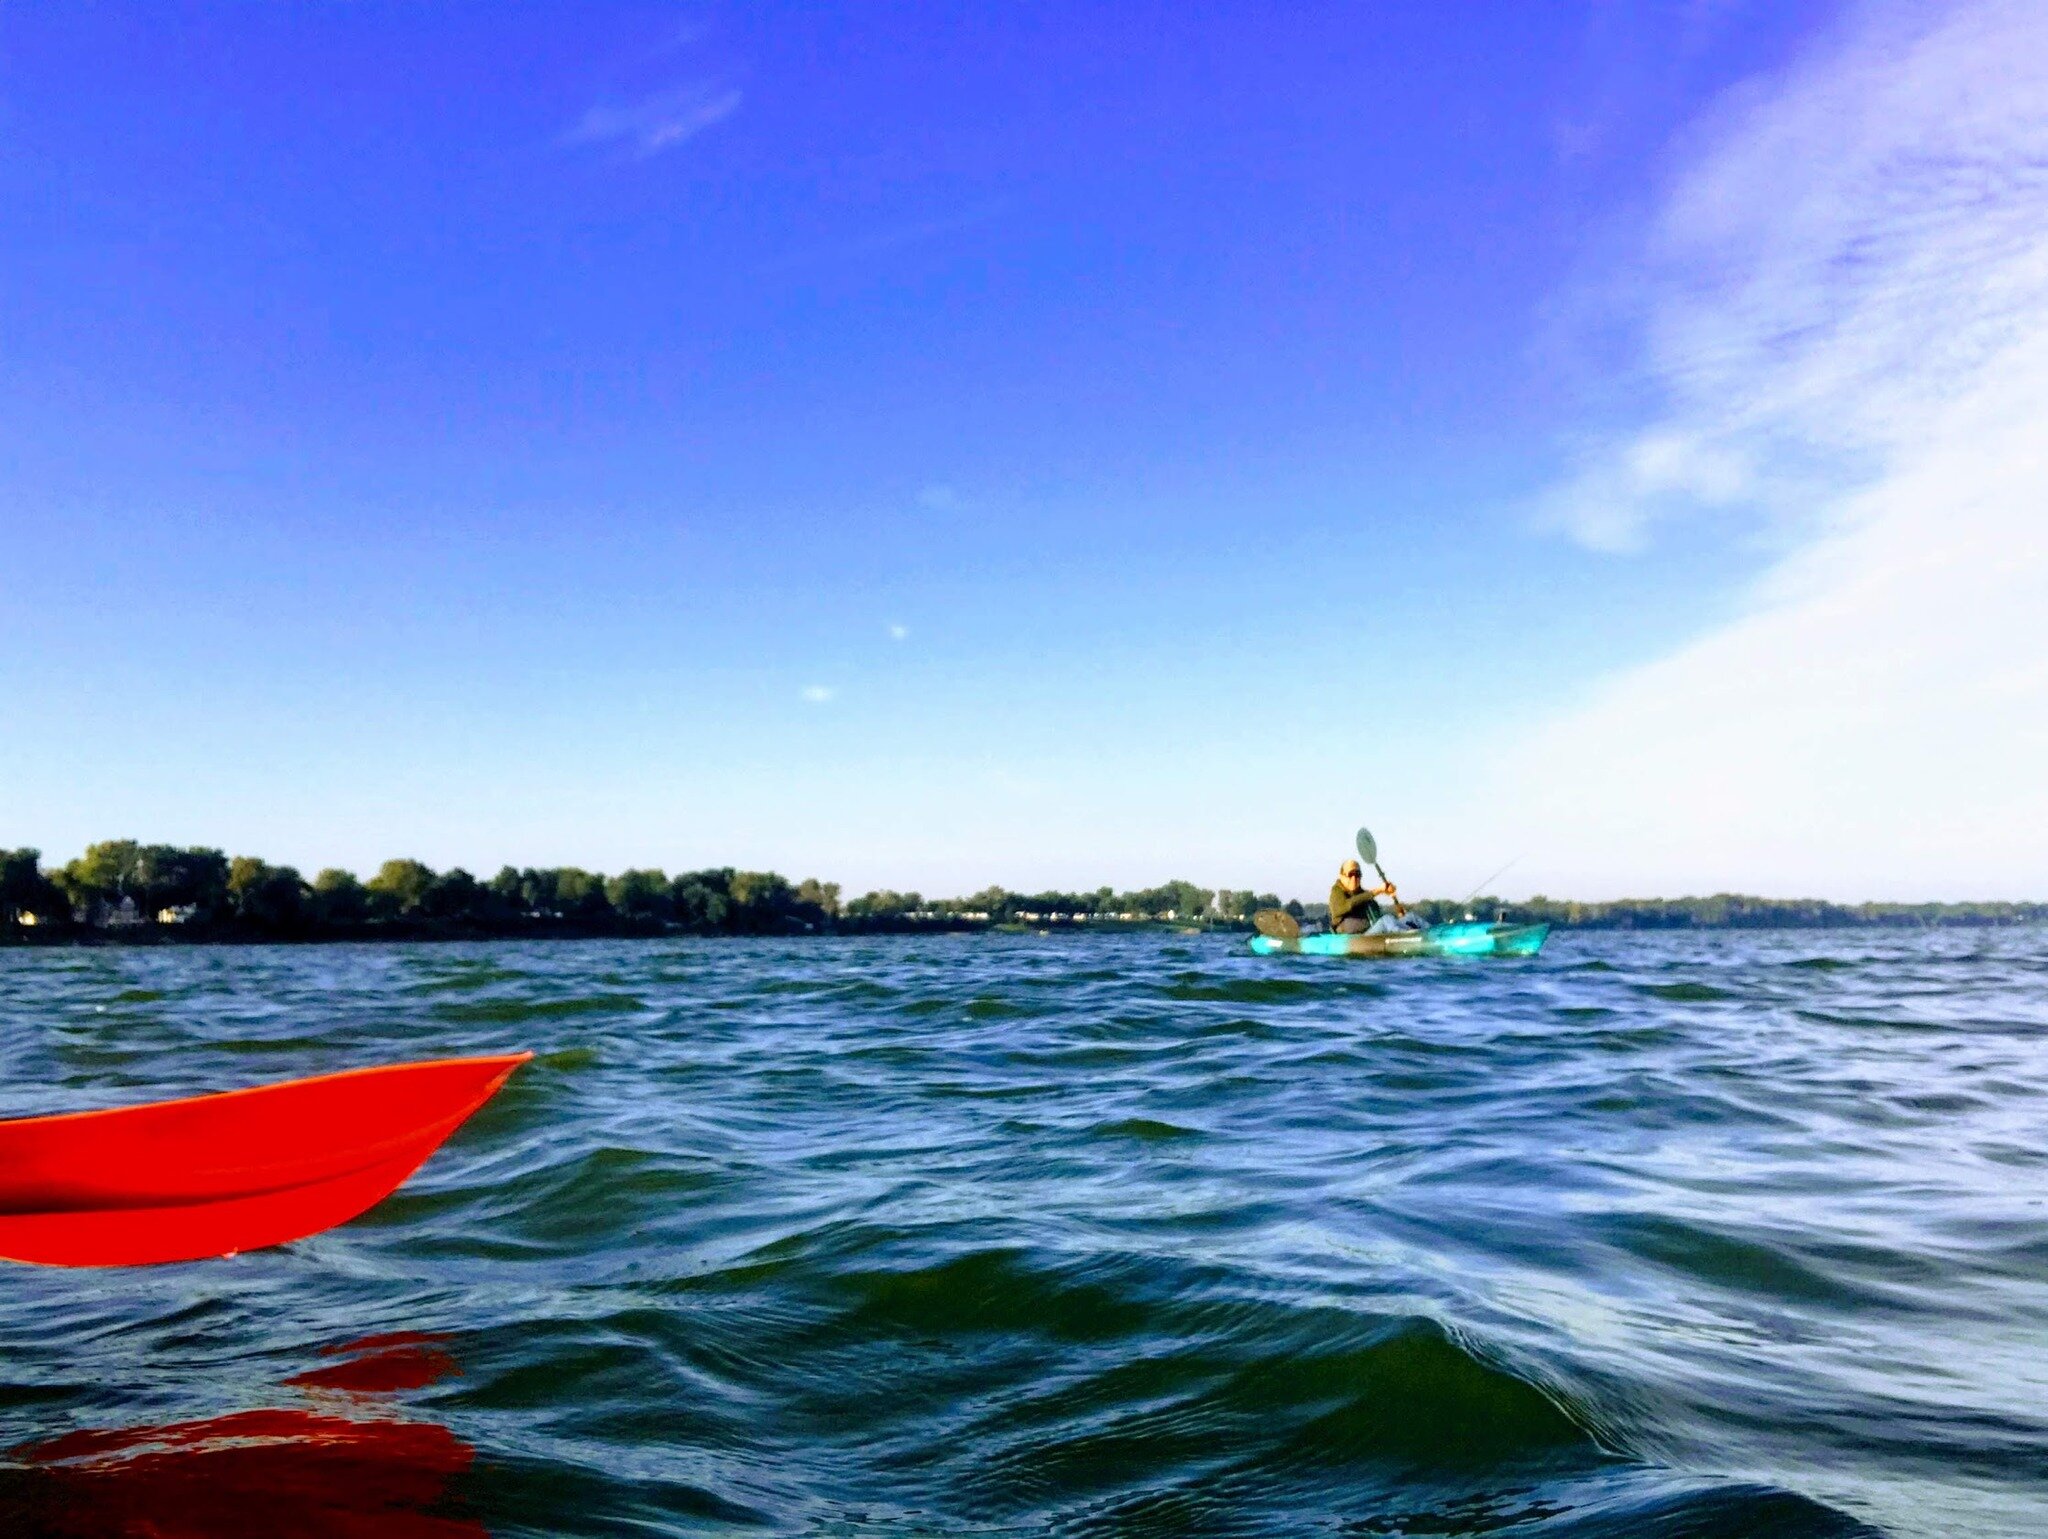 Lake Erie Adventure will be open Saturday and Sunday from 11 to 4.  Paddling mid-  week by appointment only!

Come visit us this weekend for 20% off last year kayak models!!

#lakeerieadventure #lakeerielove #LakeErieAdventure #lakelife #almostsummer